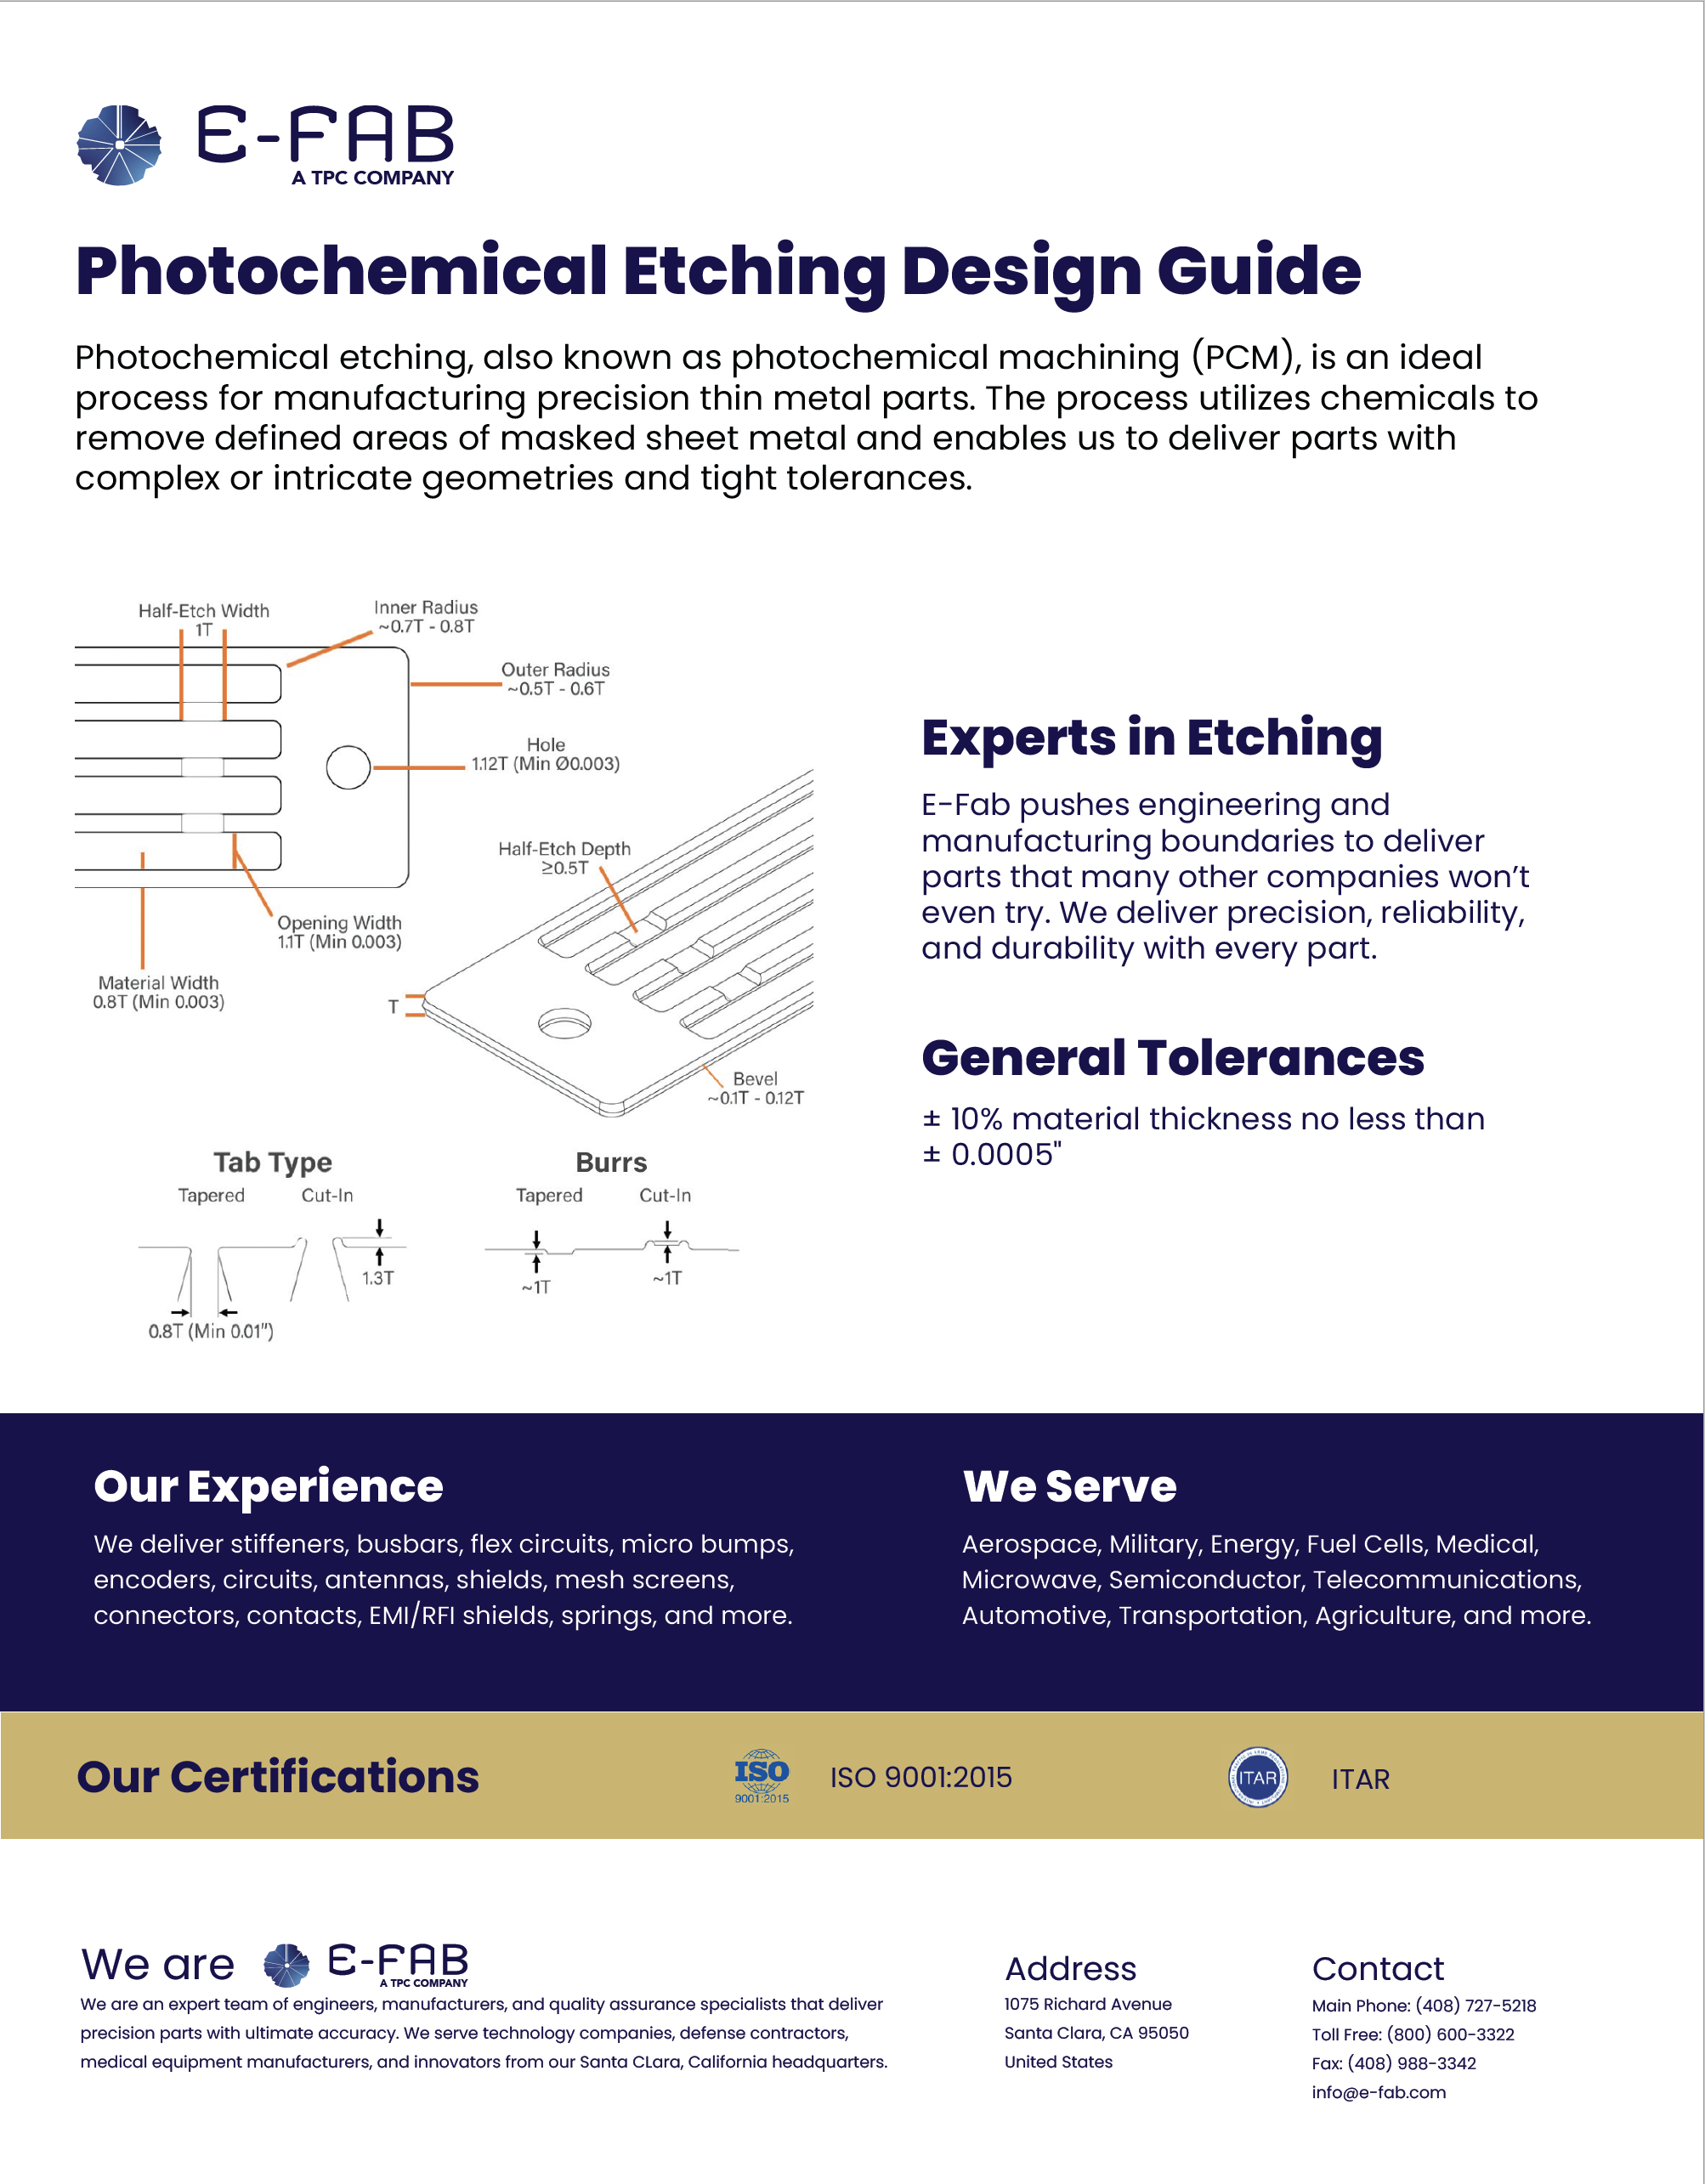 E-Fab Photochemical Etching Design Guide.